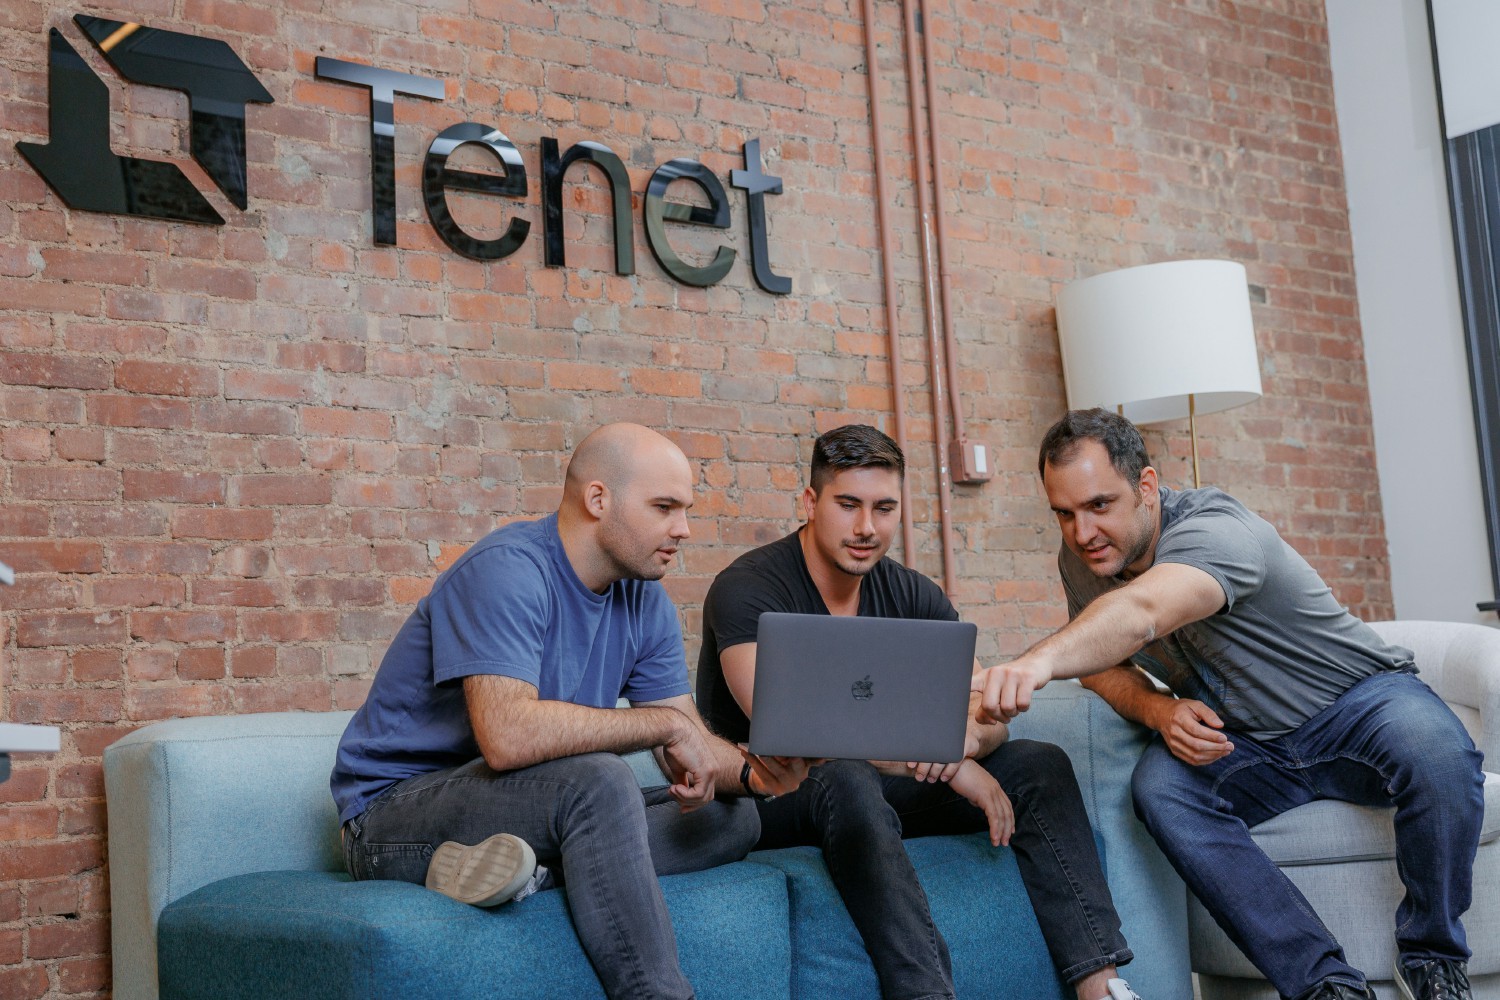 Tenet employees work from NYC headquarters